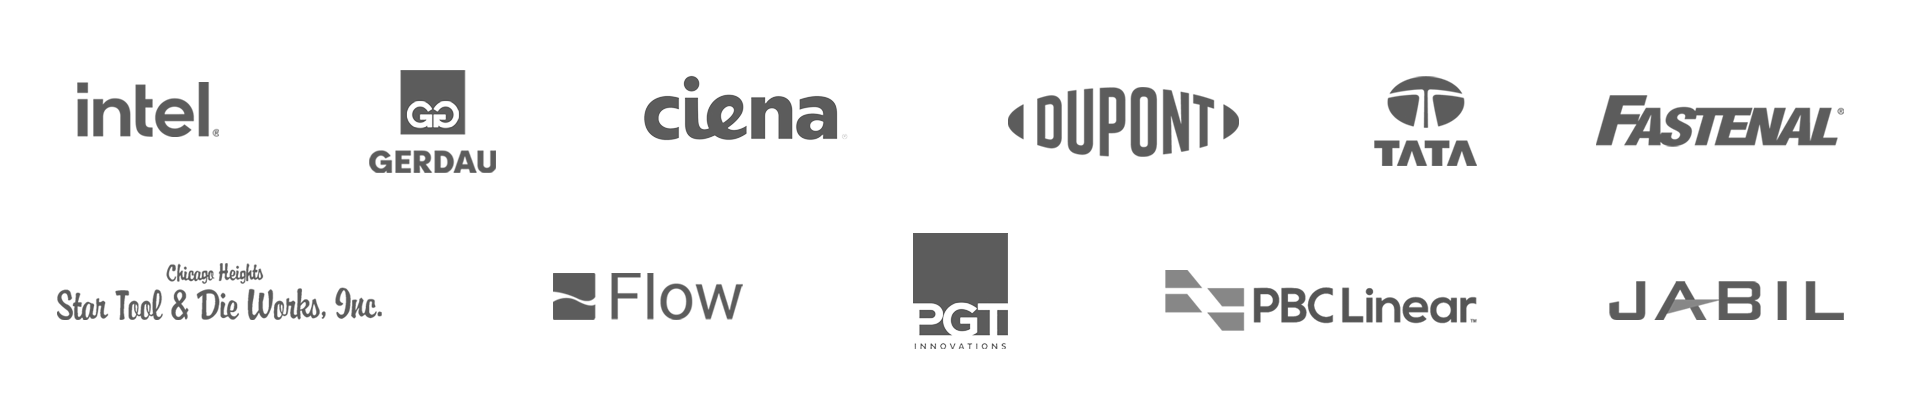 company logos of taqtile clients